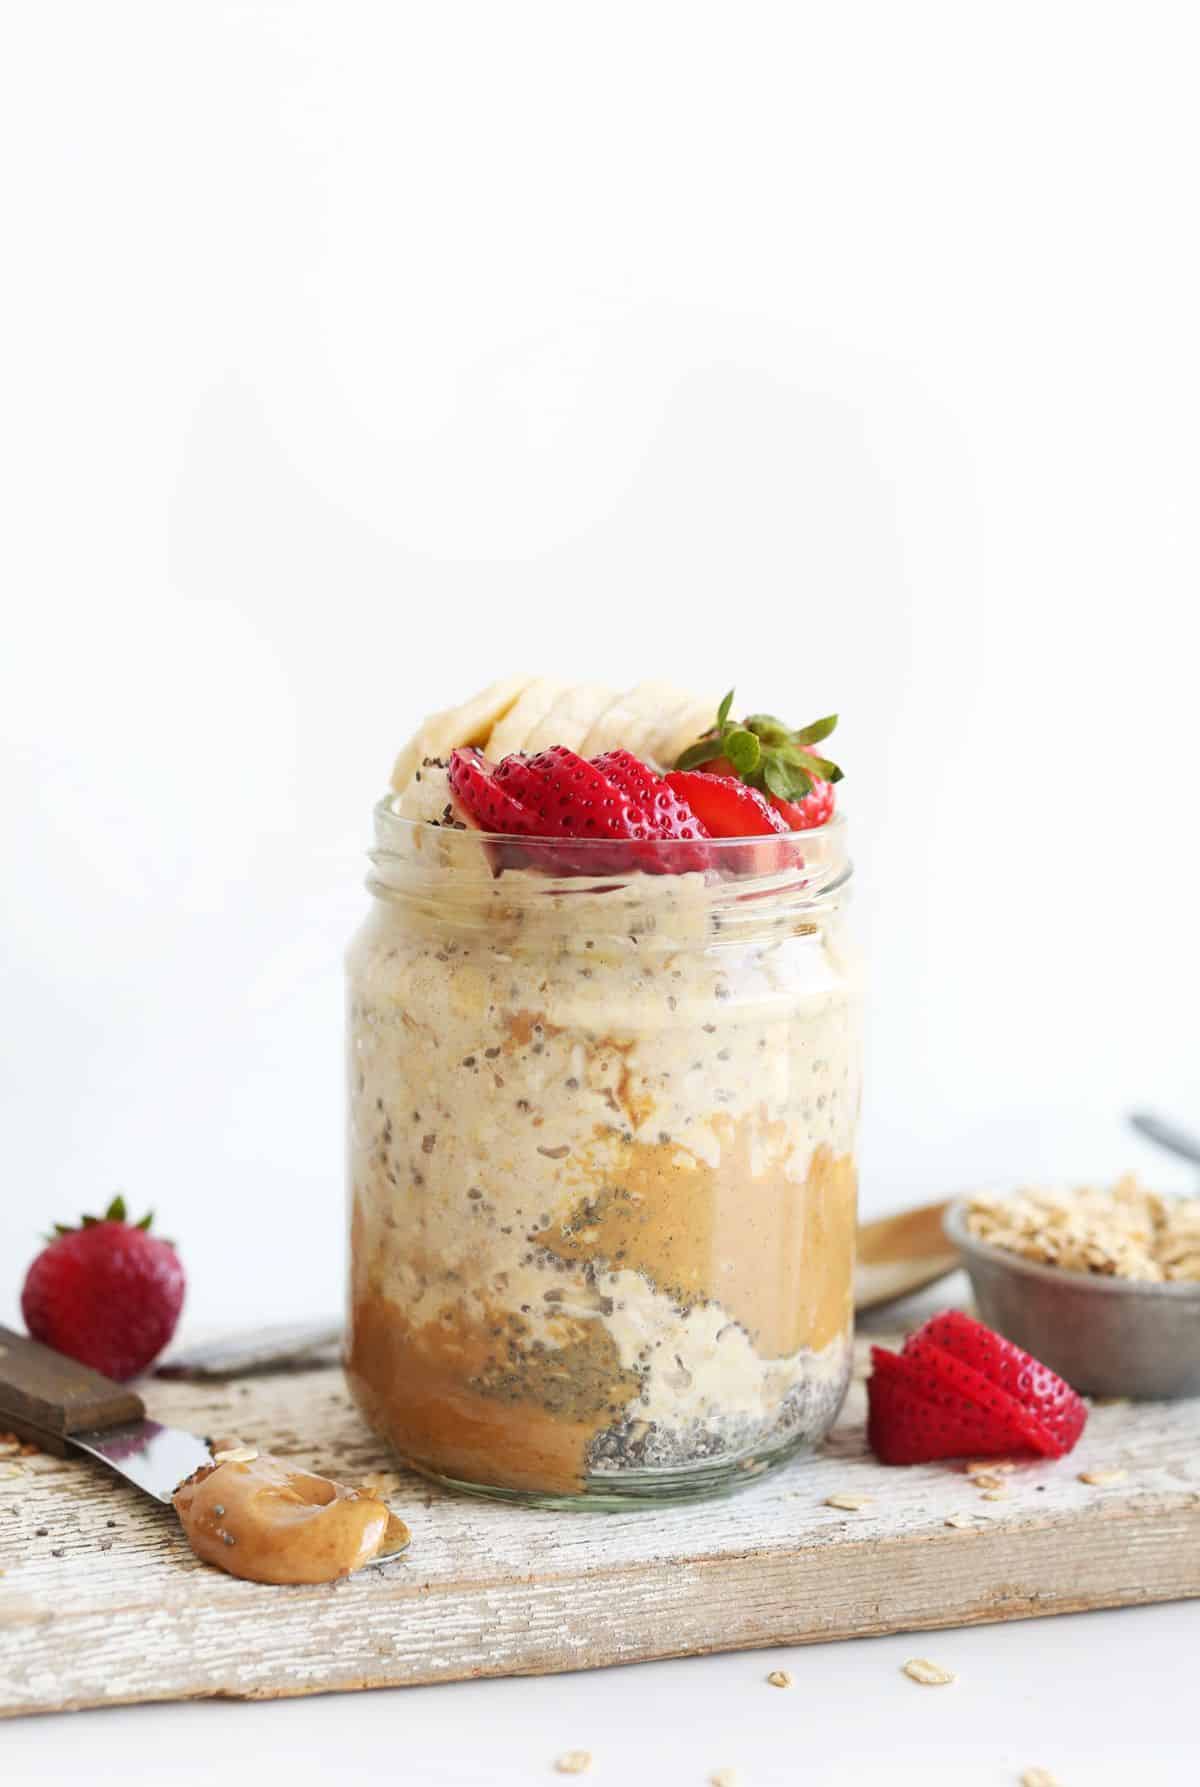 Overnight Oats with slices of banana, strawberries in a glass cup on a wooden cutting board.